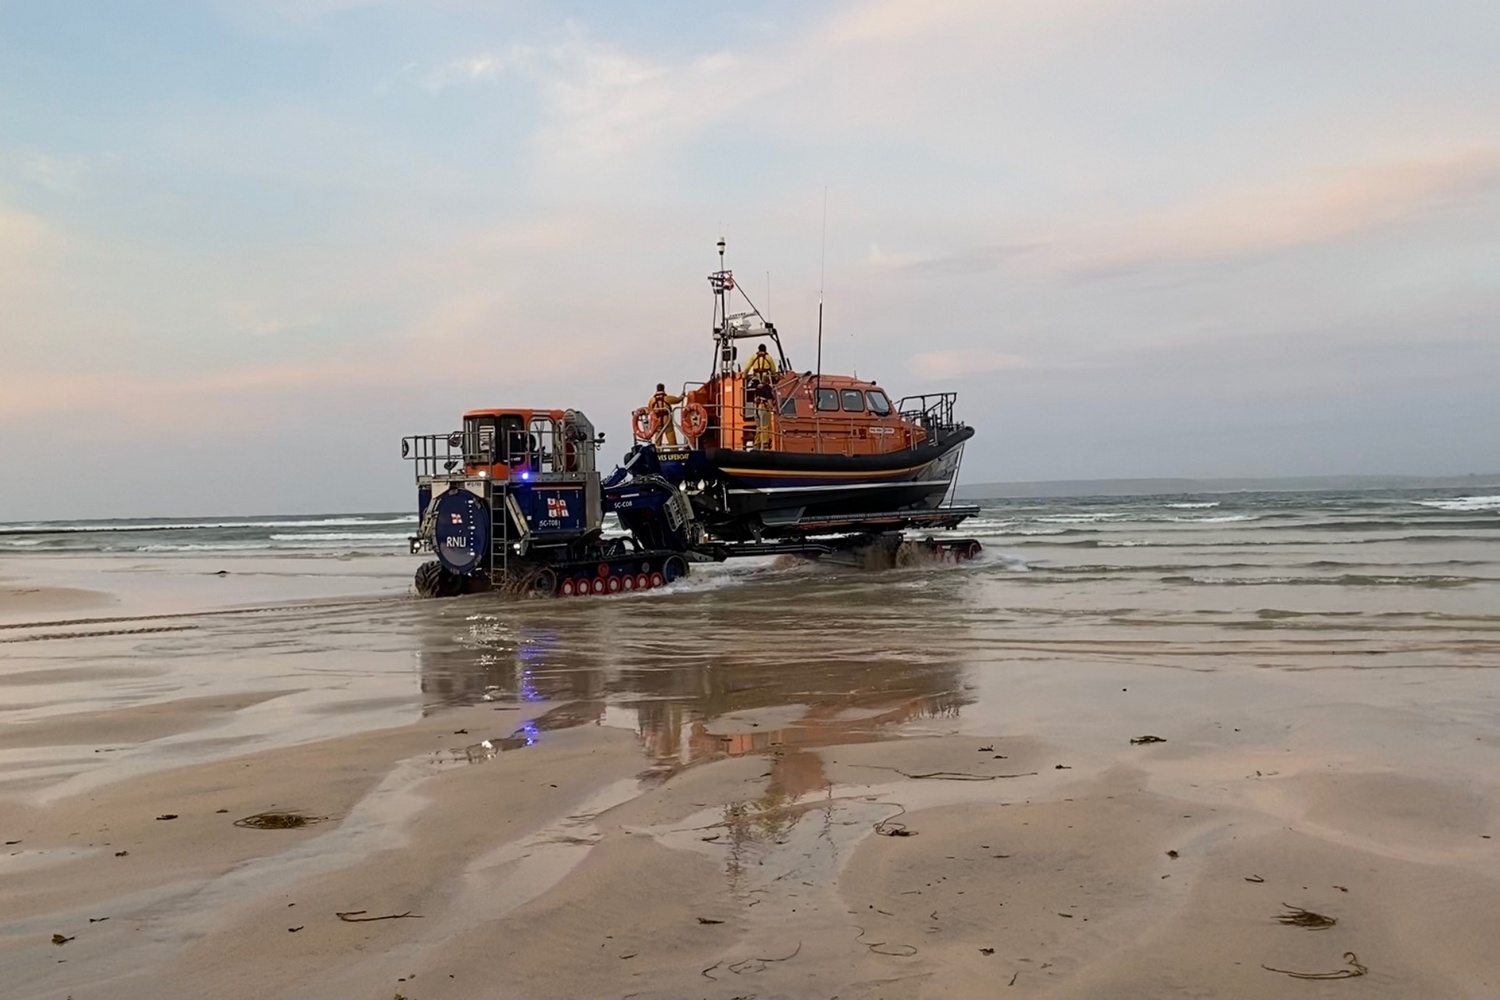 St Ives all-weather lifeboat